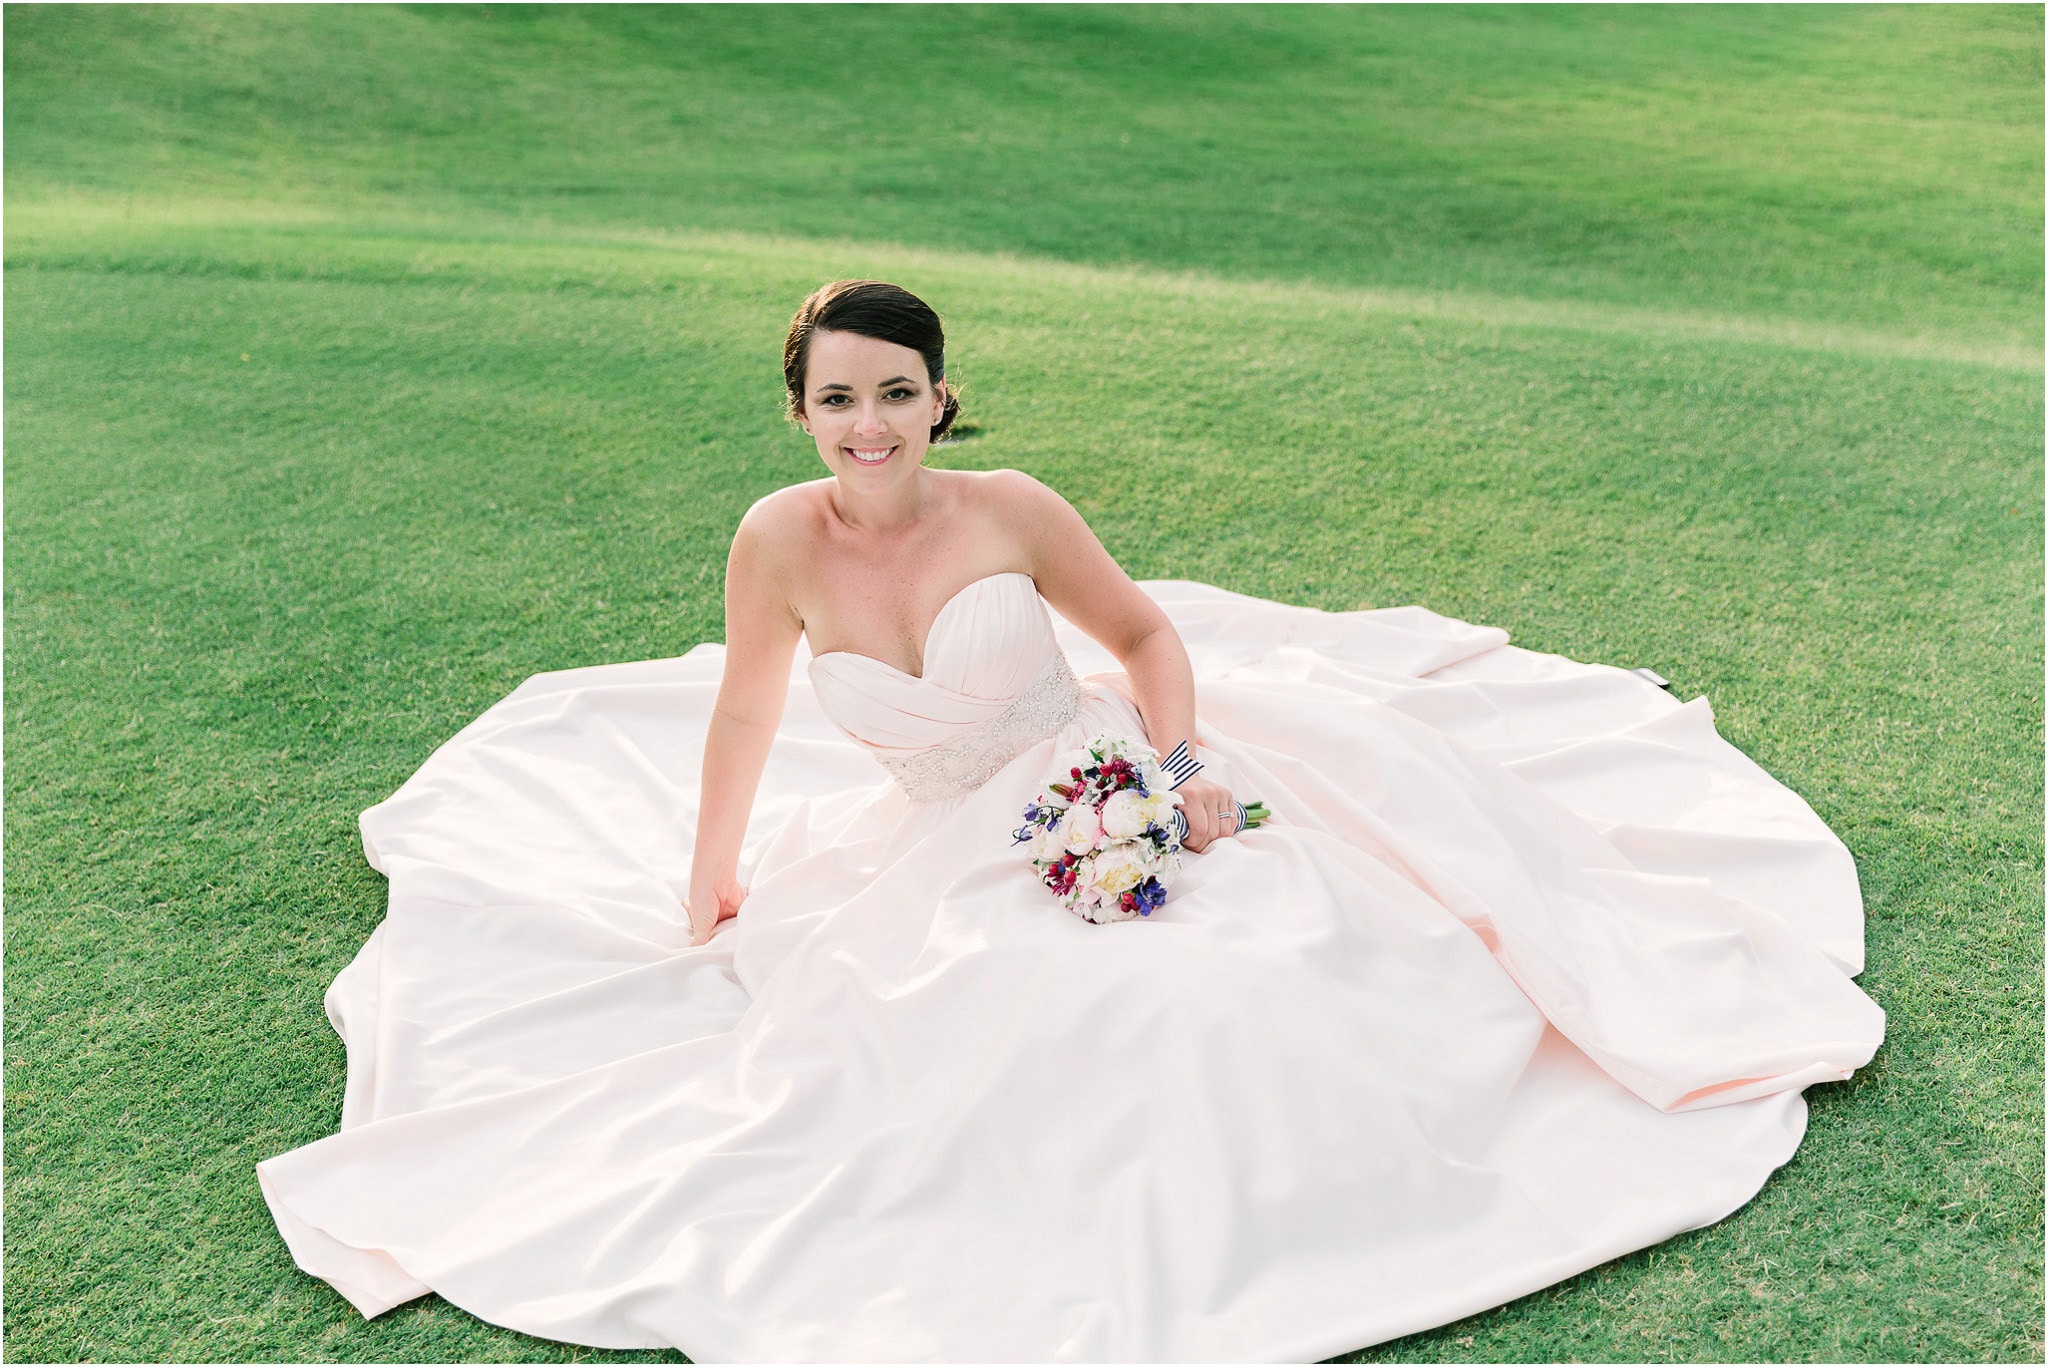 The brides dress spread across the grass like a large lilly 